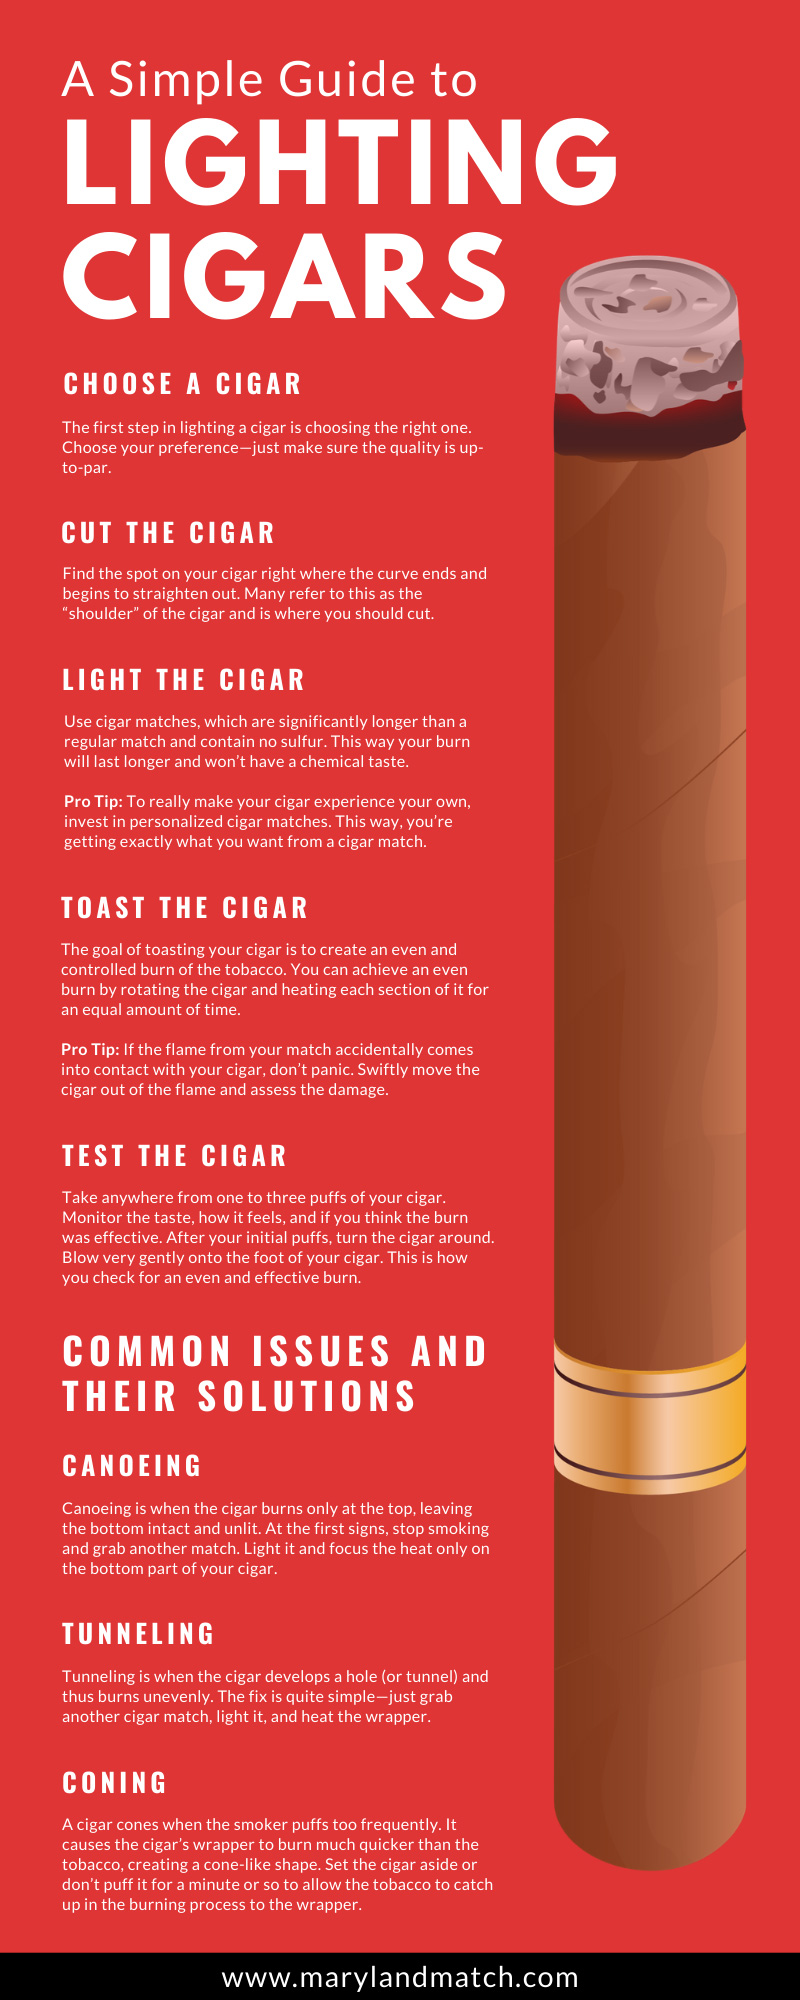 How to Light a Cigars